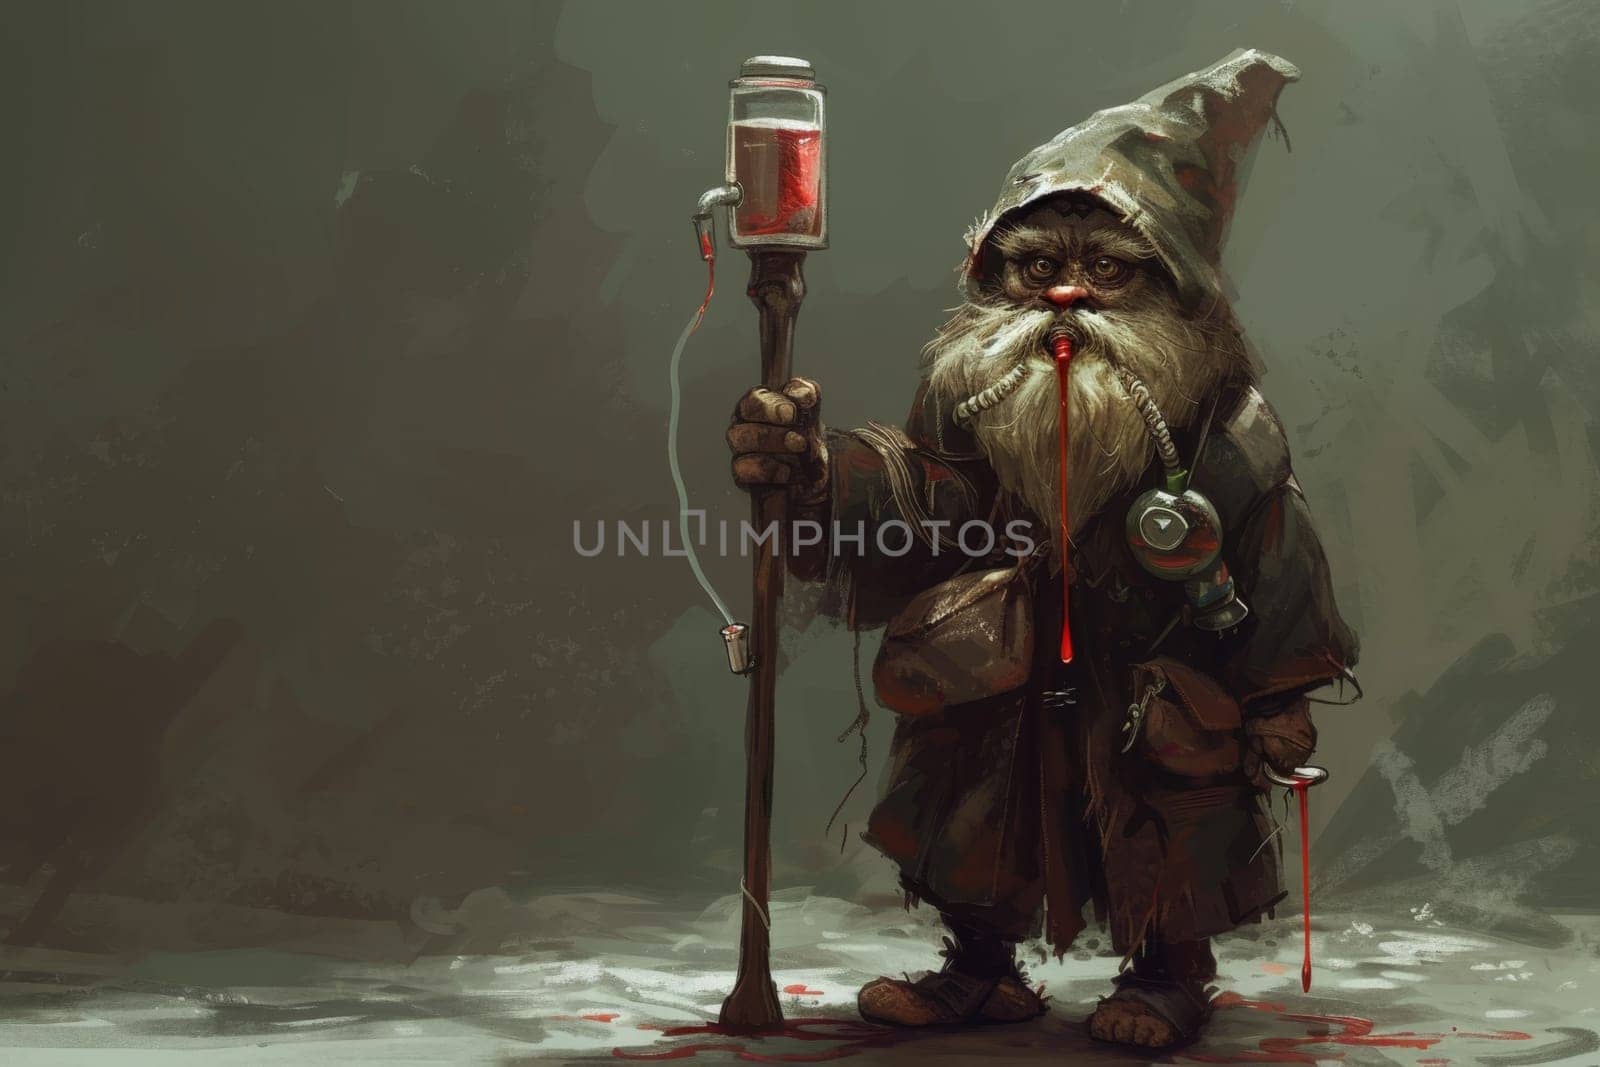 A dwarf wizard with a cane. A fabulous bearded wizard. A fairy dwarf elf with a cane. 3d illustration.